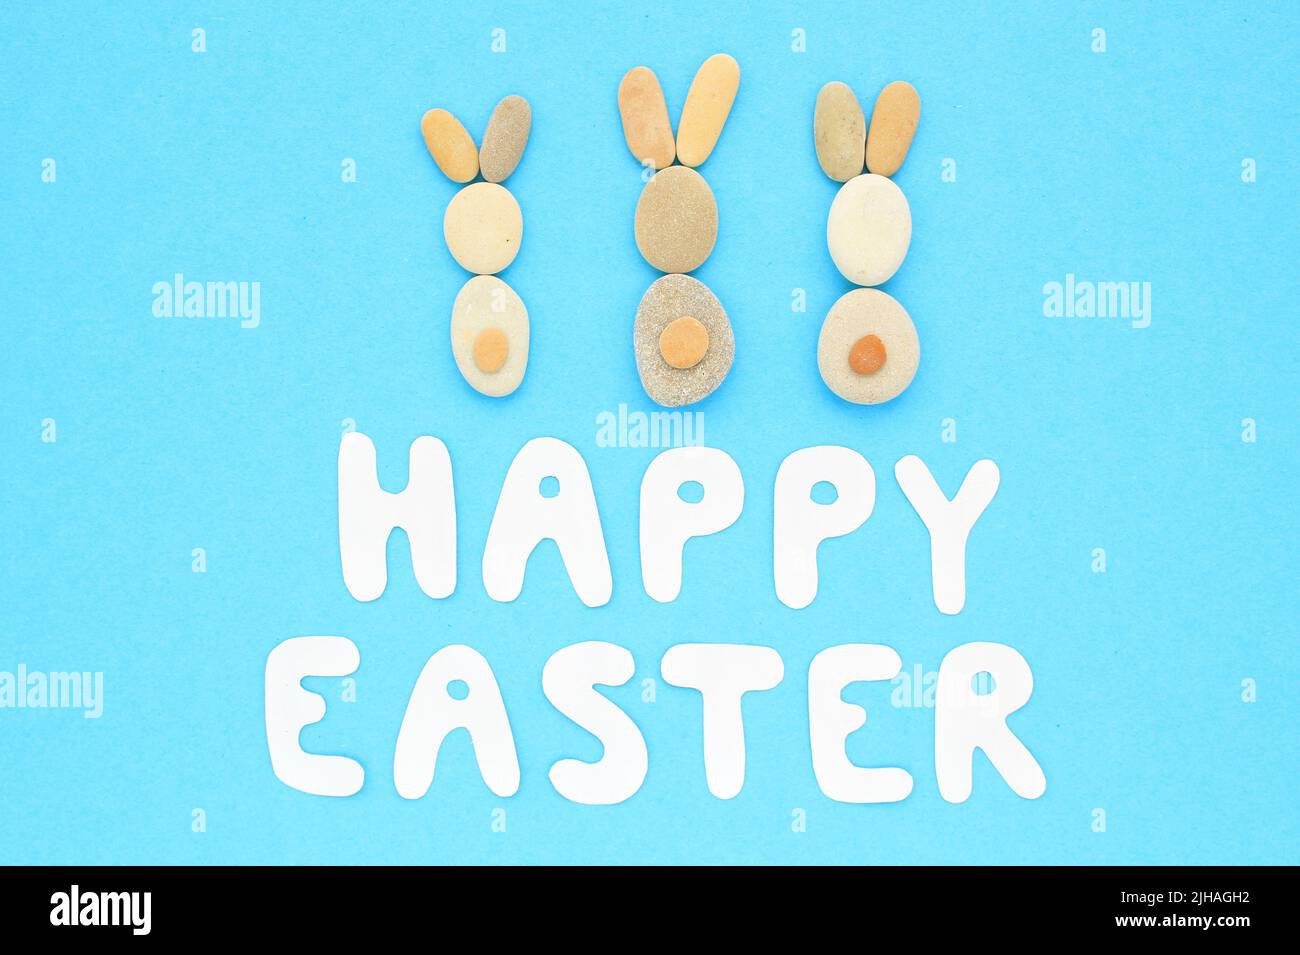 Happy Easter lettering and bunnies from pebbles on blue background. Flatlay postcard creative concept. Creative greetings with natural craft materials Stock Photo